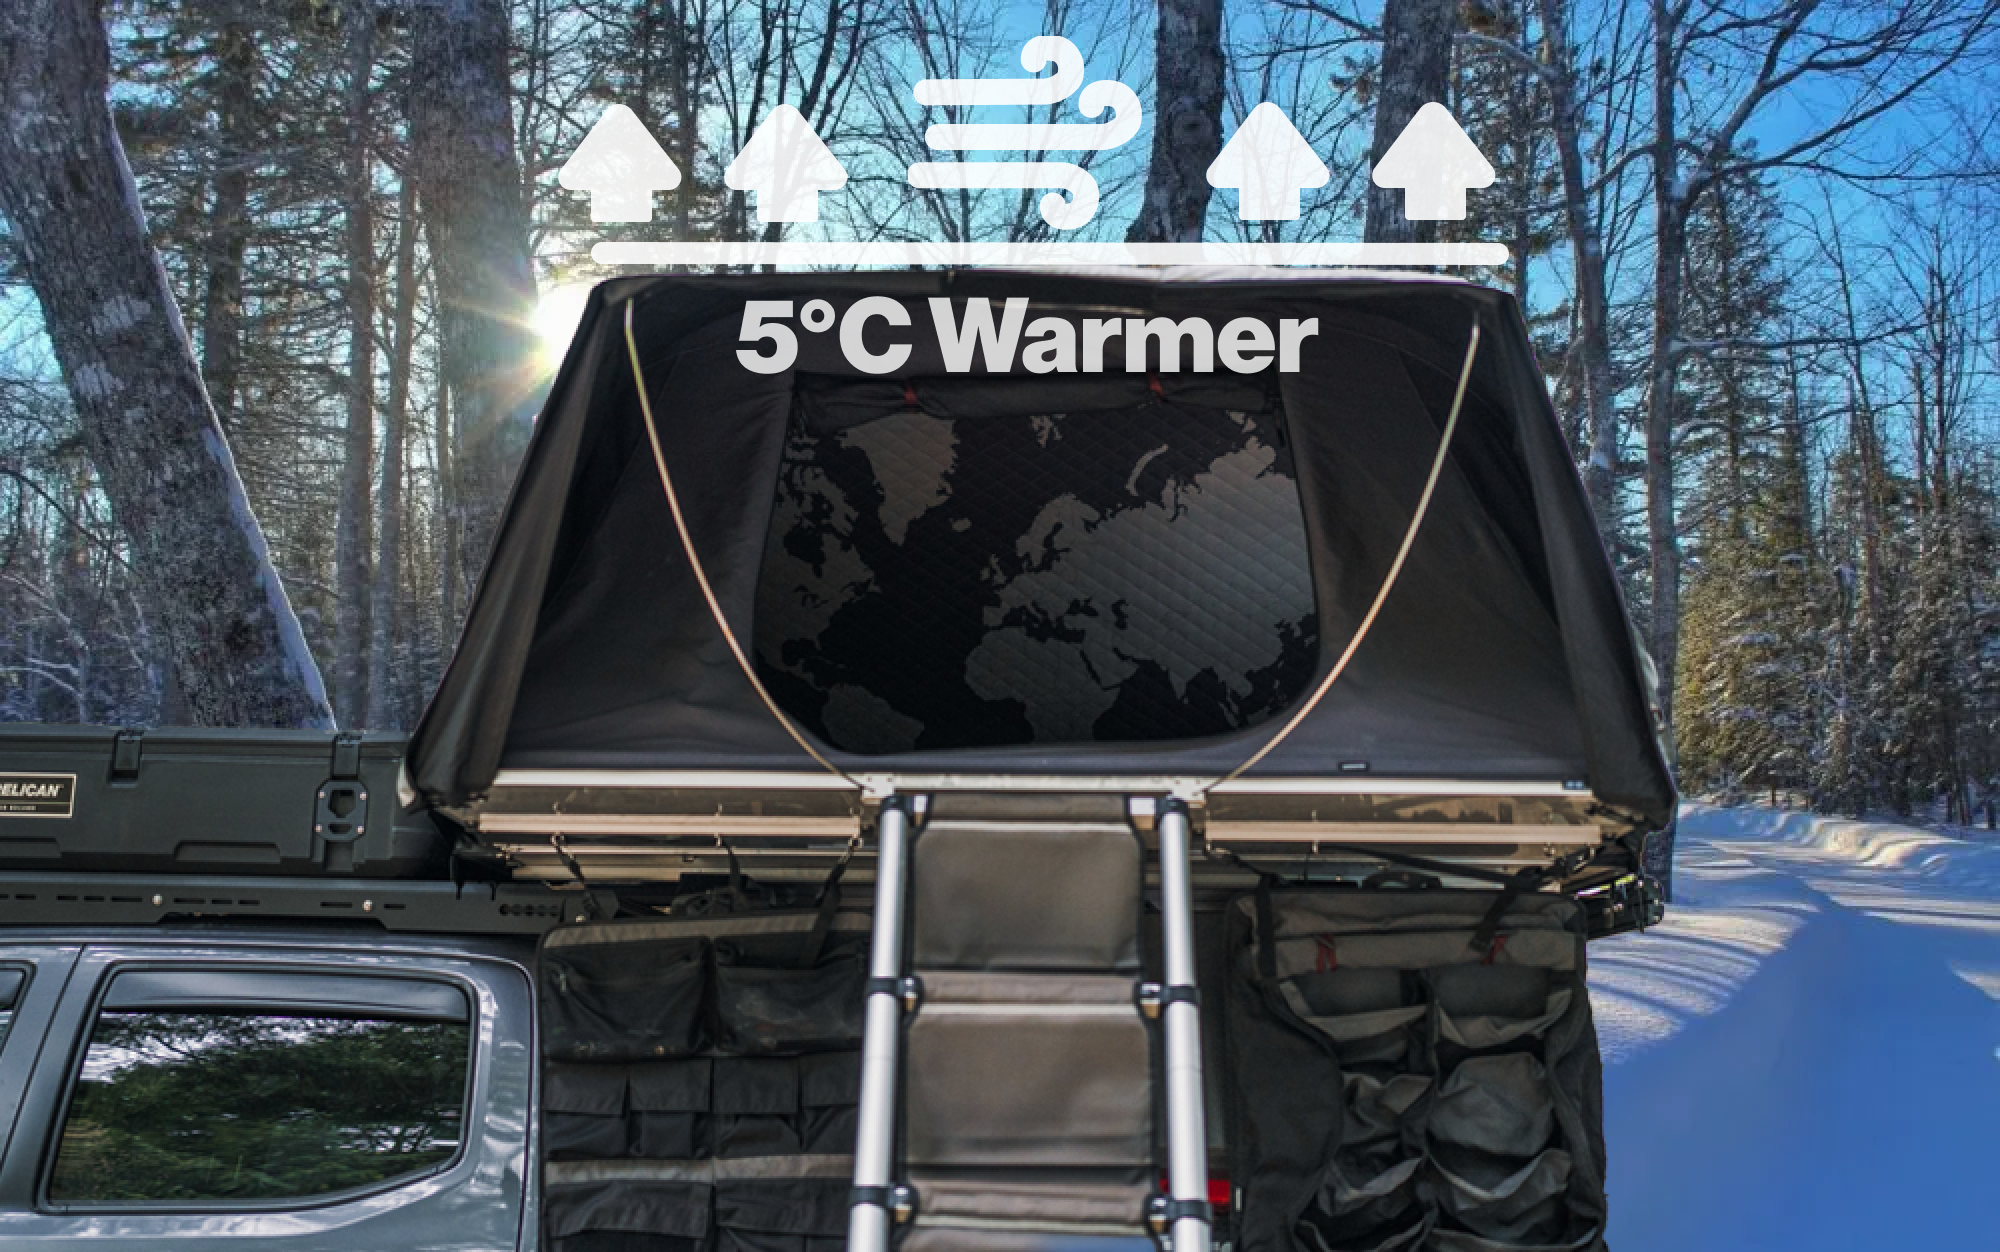 LNT Overland 4S Cover keeps heats inside and make tent 5 degree warmer than outside